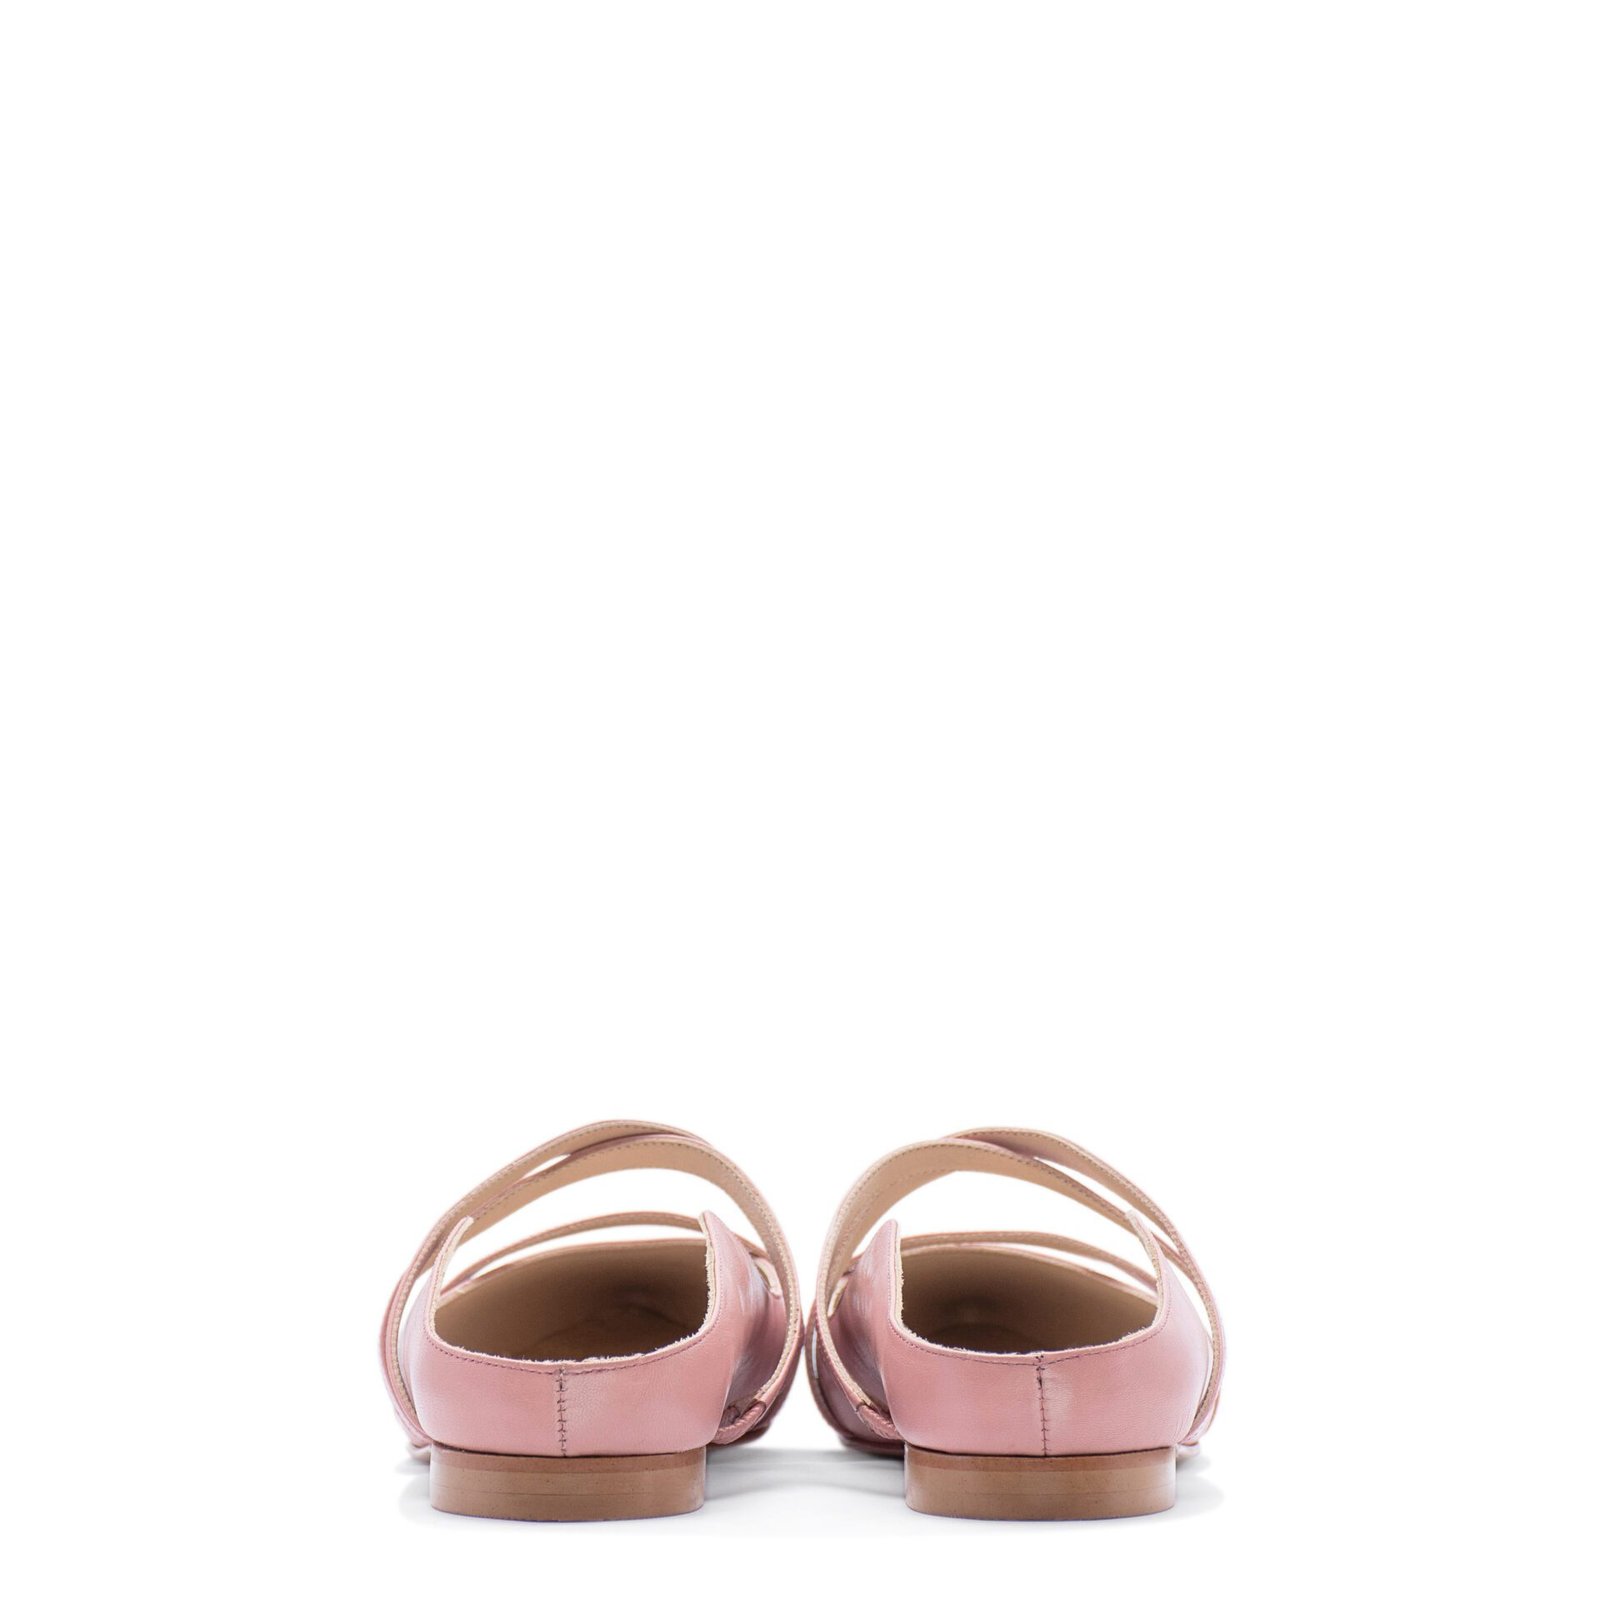 pink pointed-toe bridal flat shoes